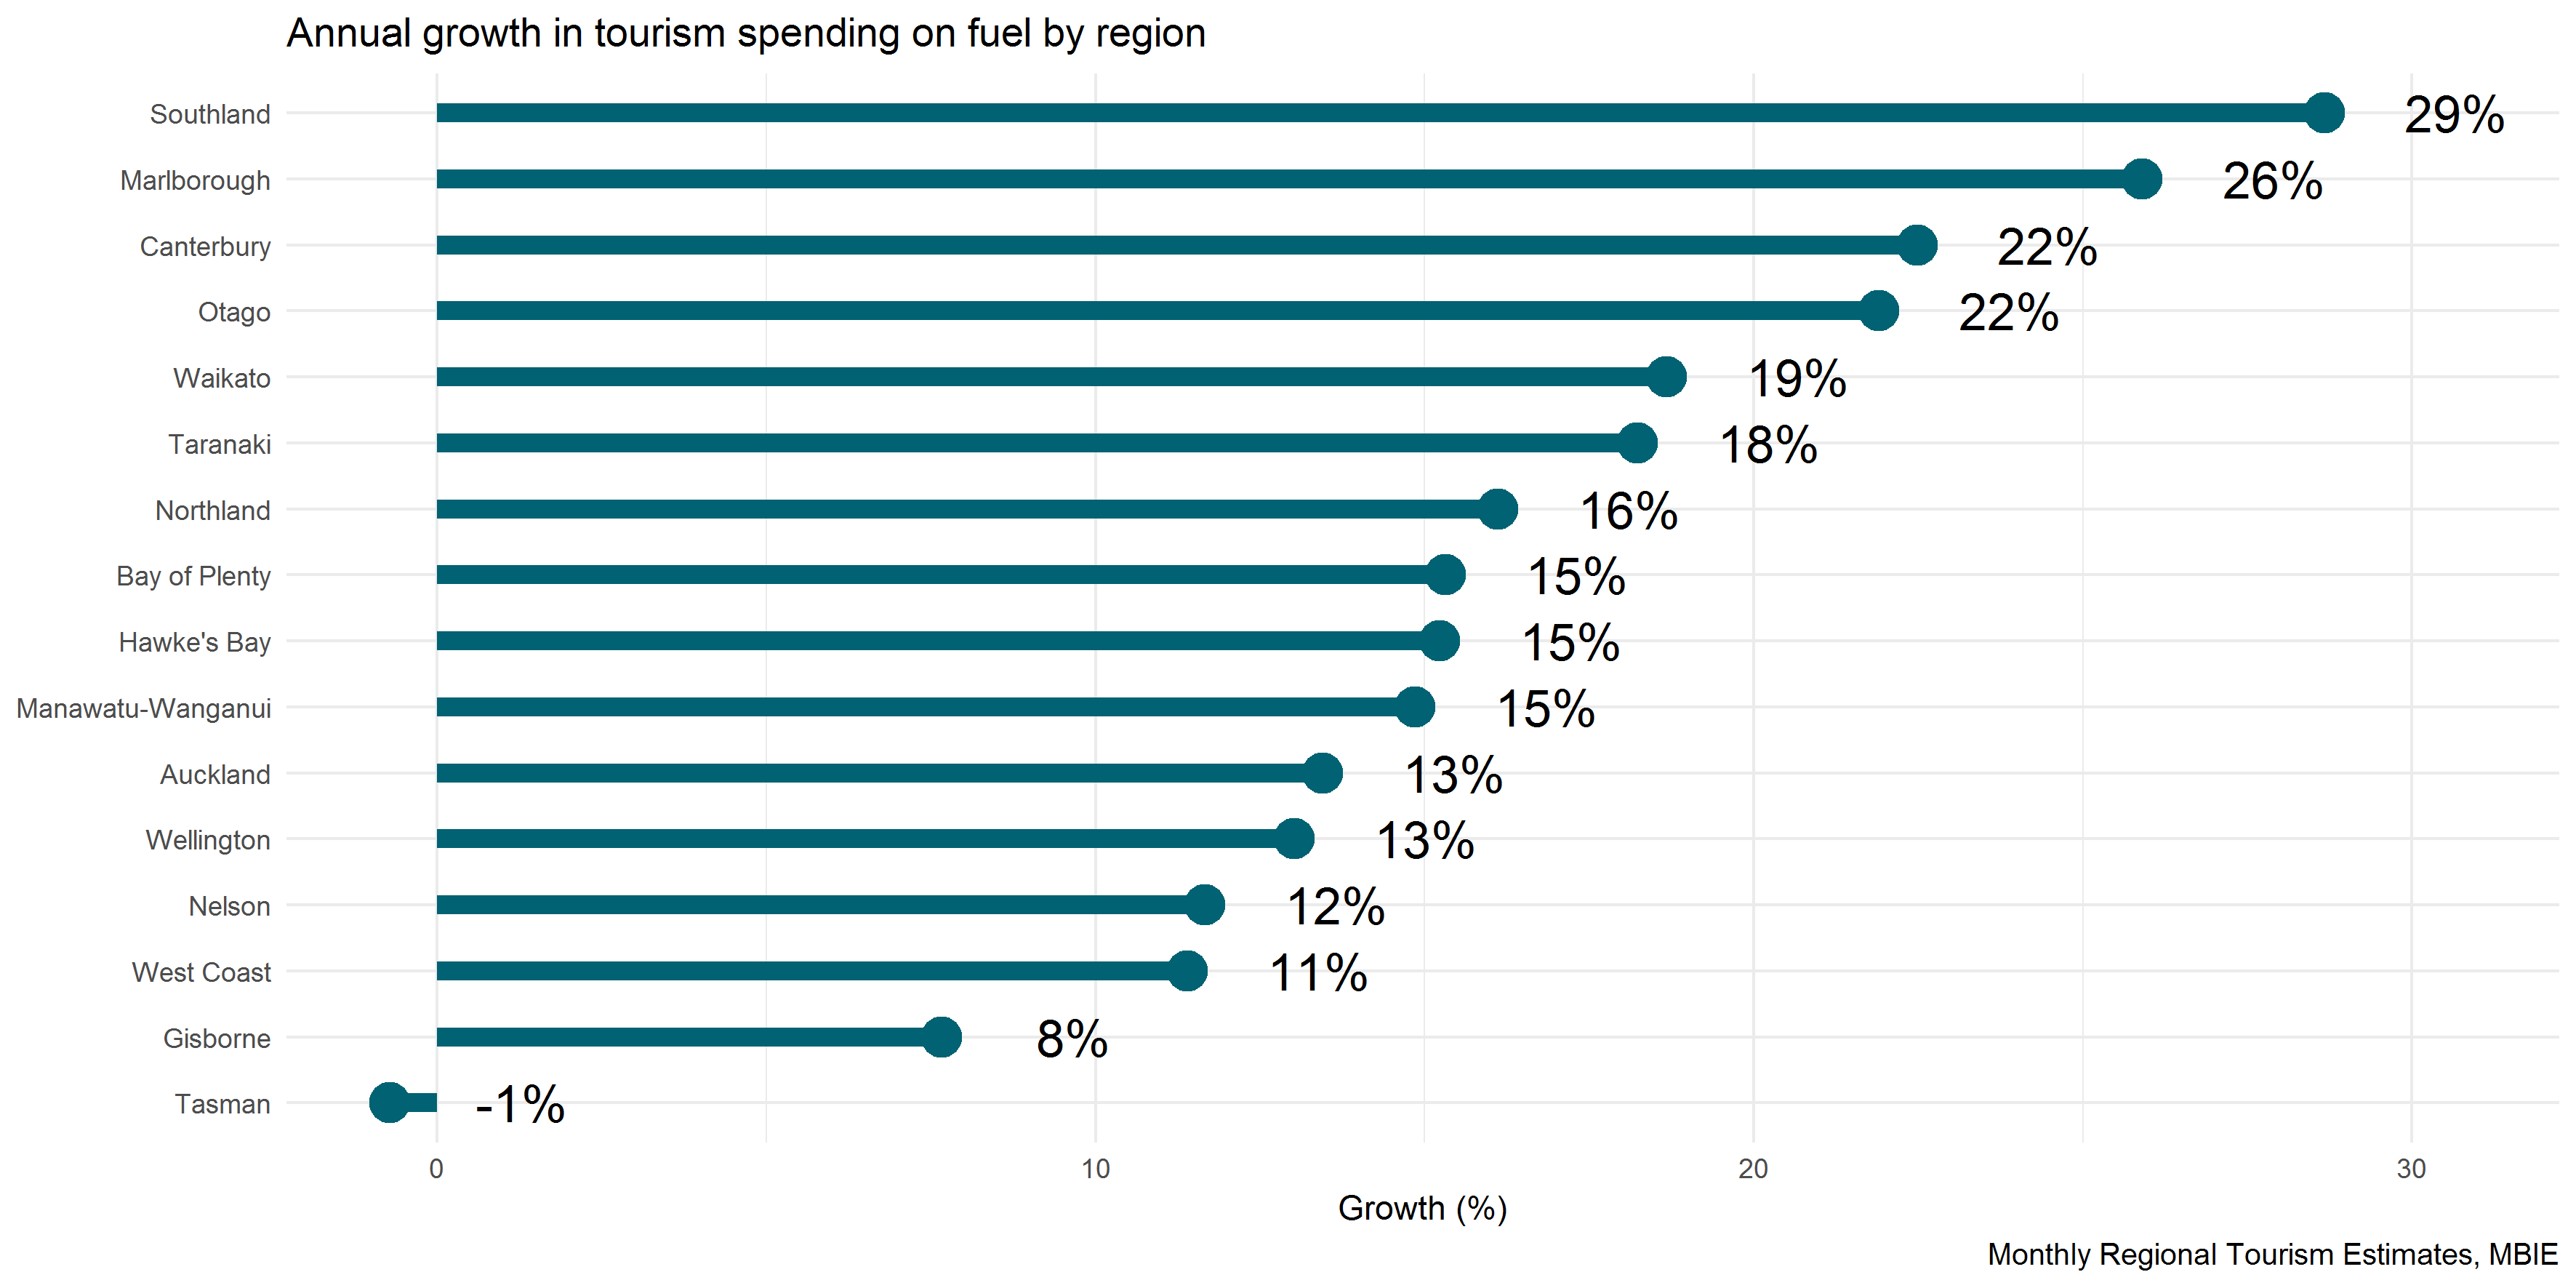 Annual growth in tourism spending on fuel by region